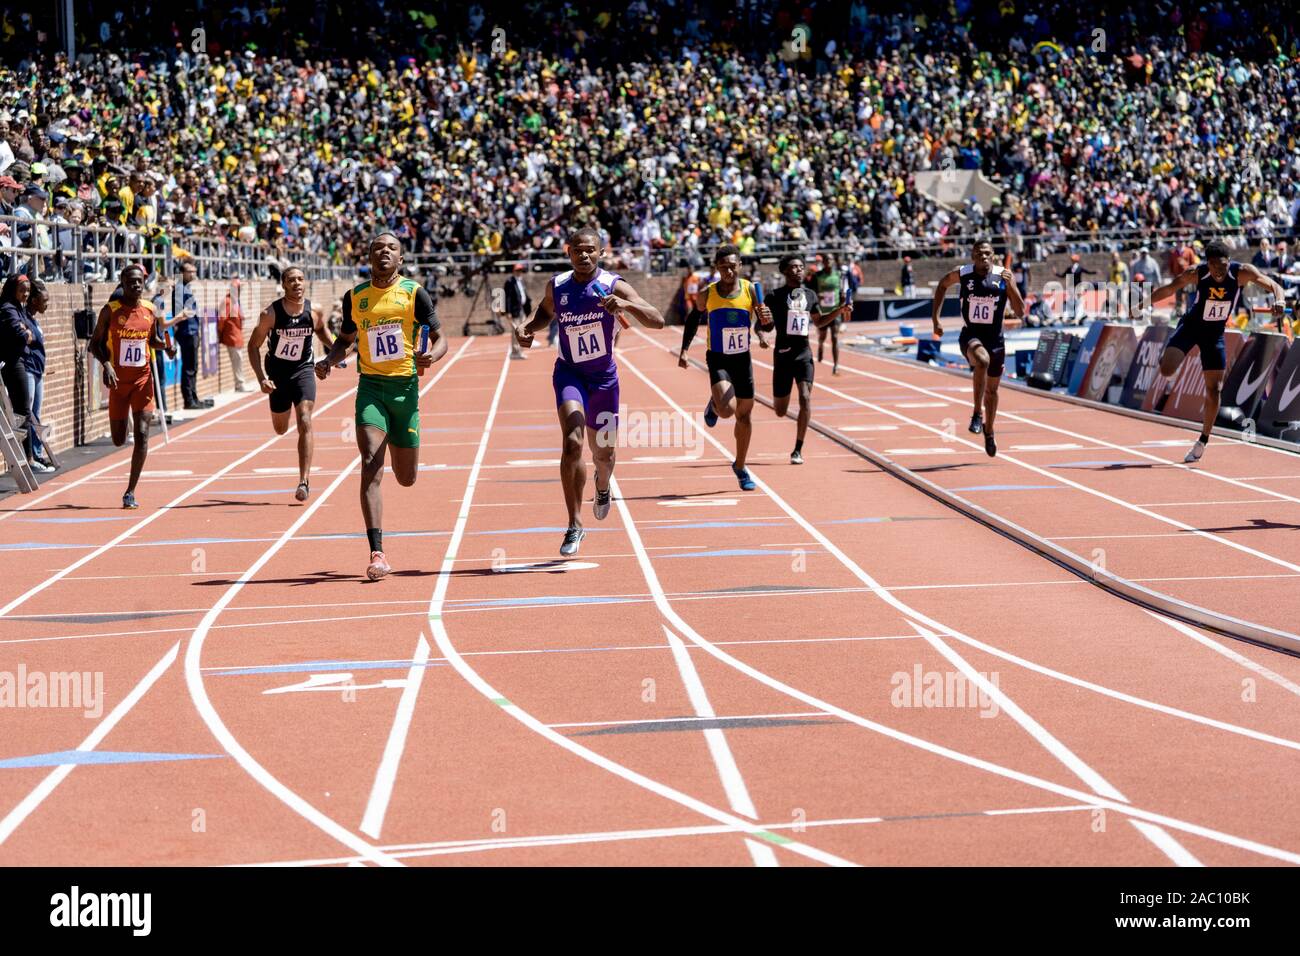 Finish of High School Boys' 4x100 Championship of America at the 2019 Penn Relay . Stock Photo